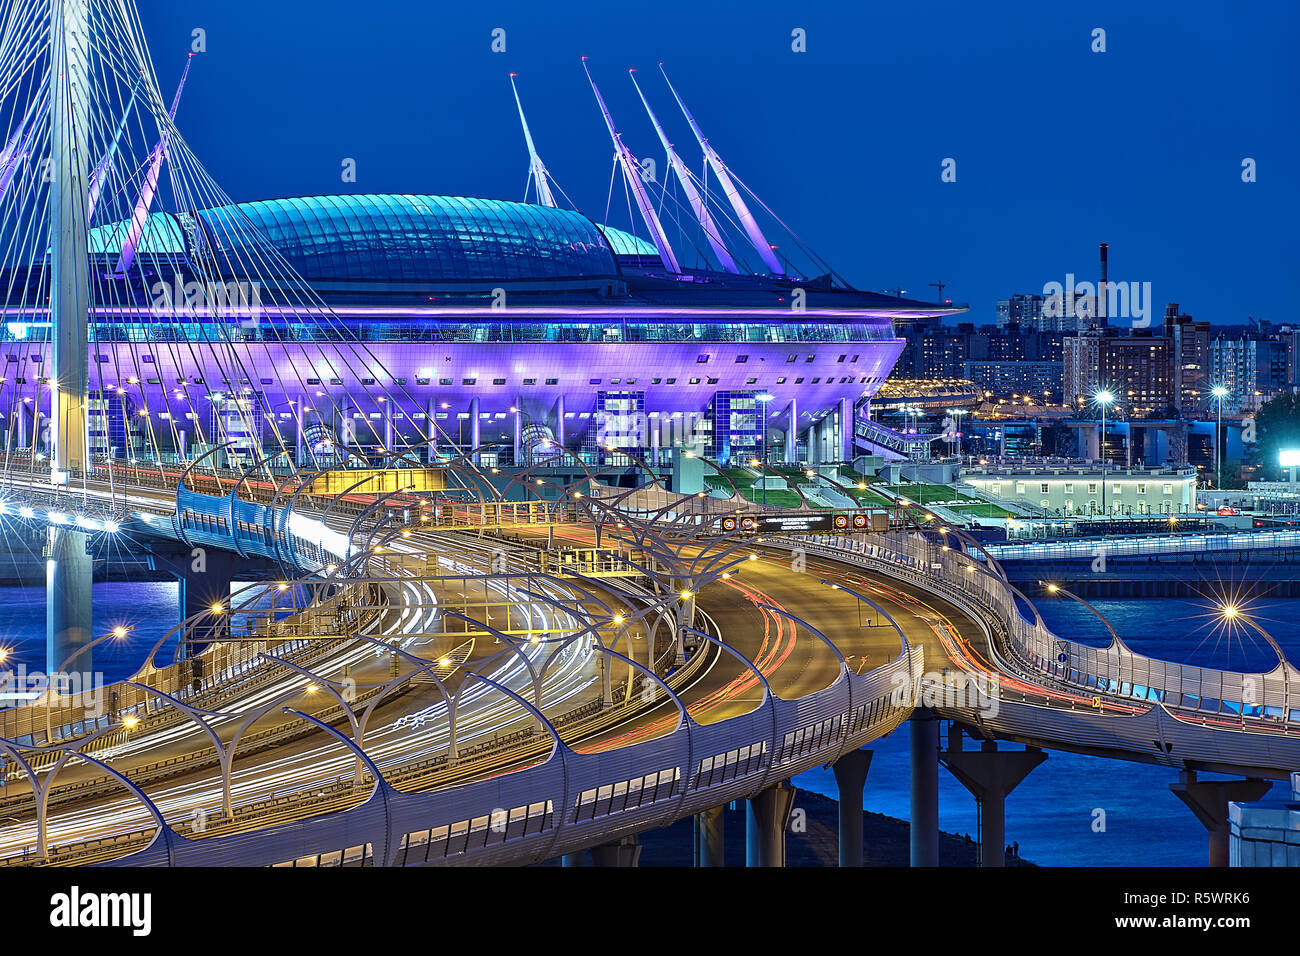 St. Petersburg, Russia - August 22, 2018: Saint Petersburg Arena and cable-stayed bridge over river Neva in blue hour. Stock Photo